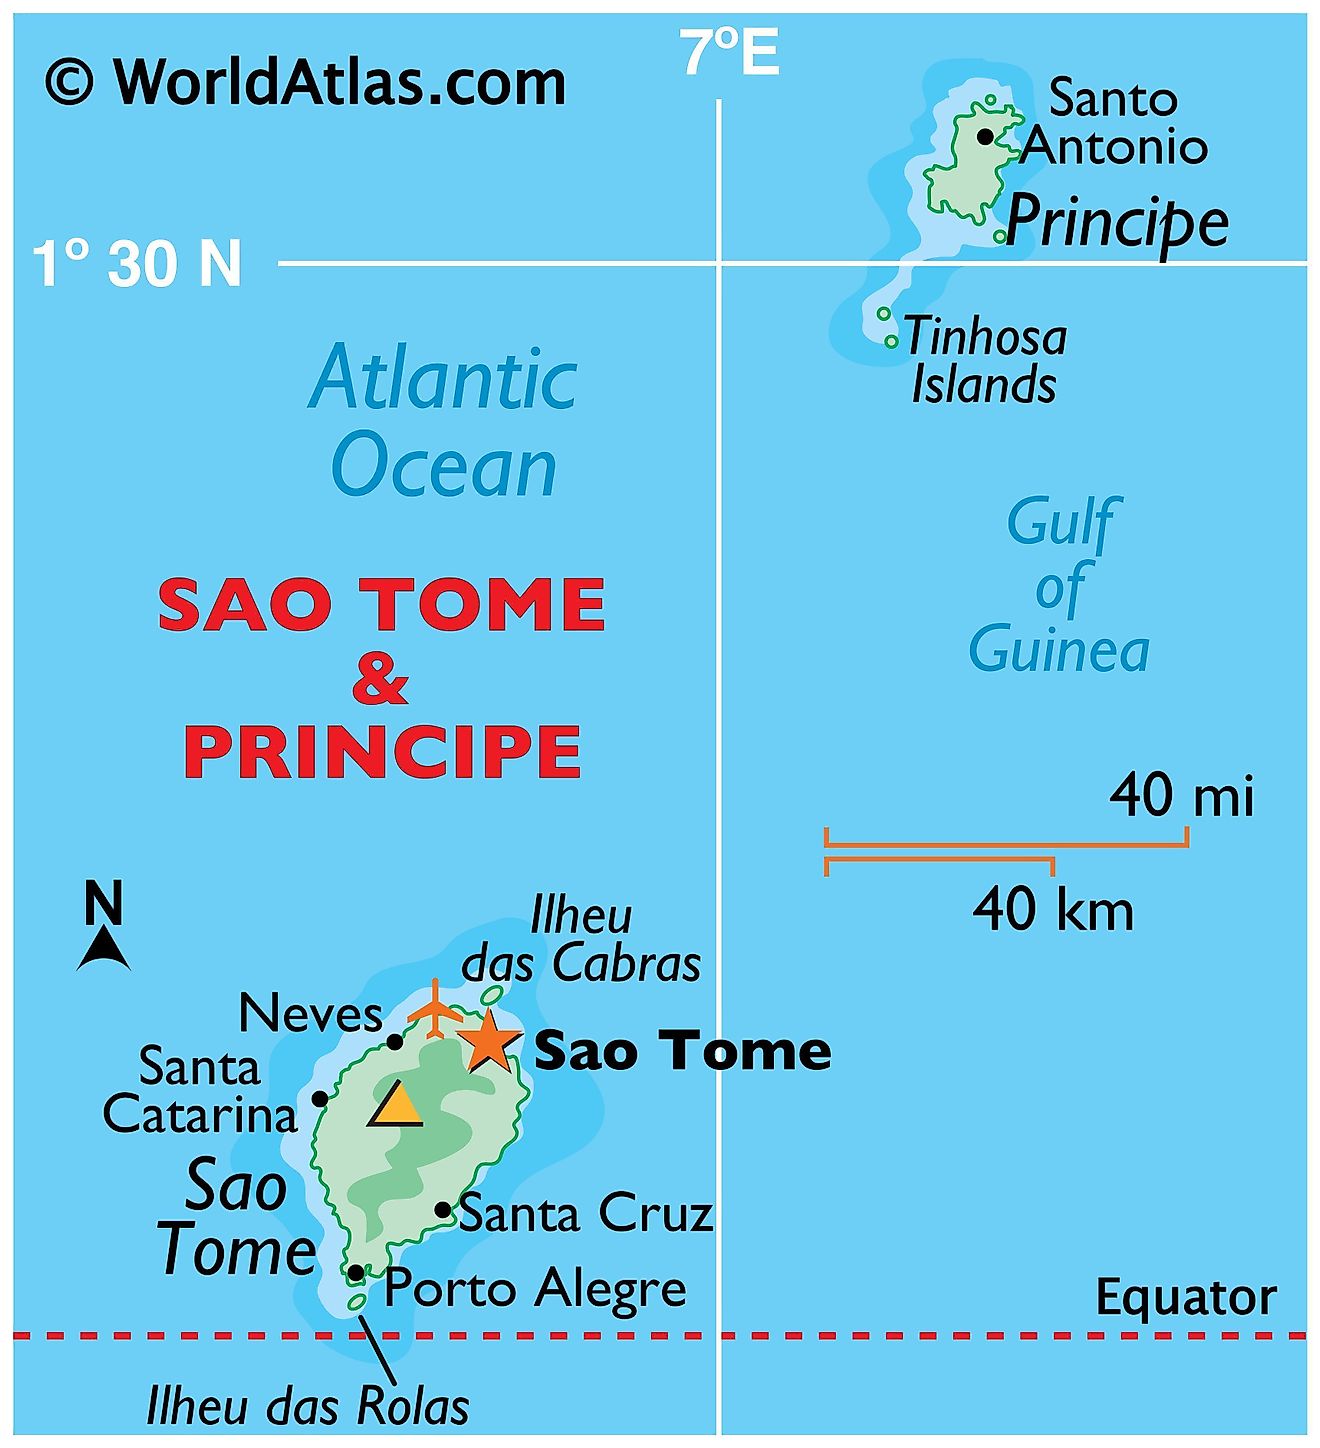 Maps and facts of Sao Tome and Principe